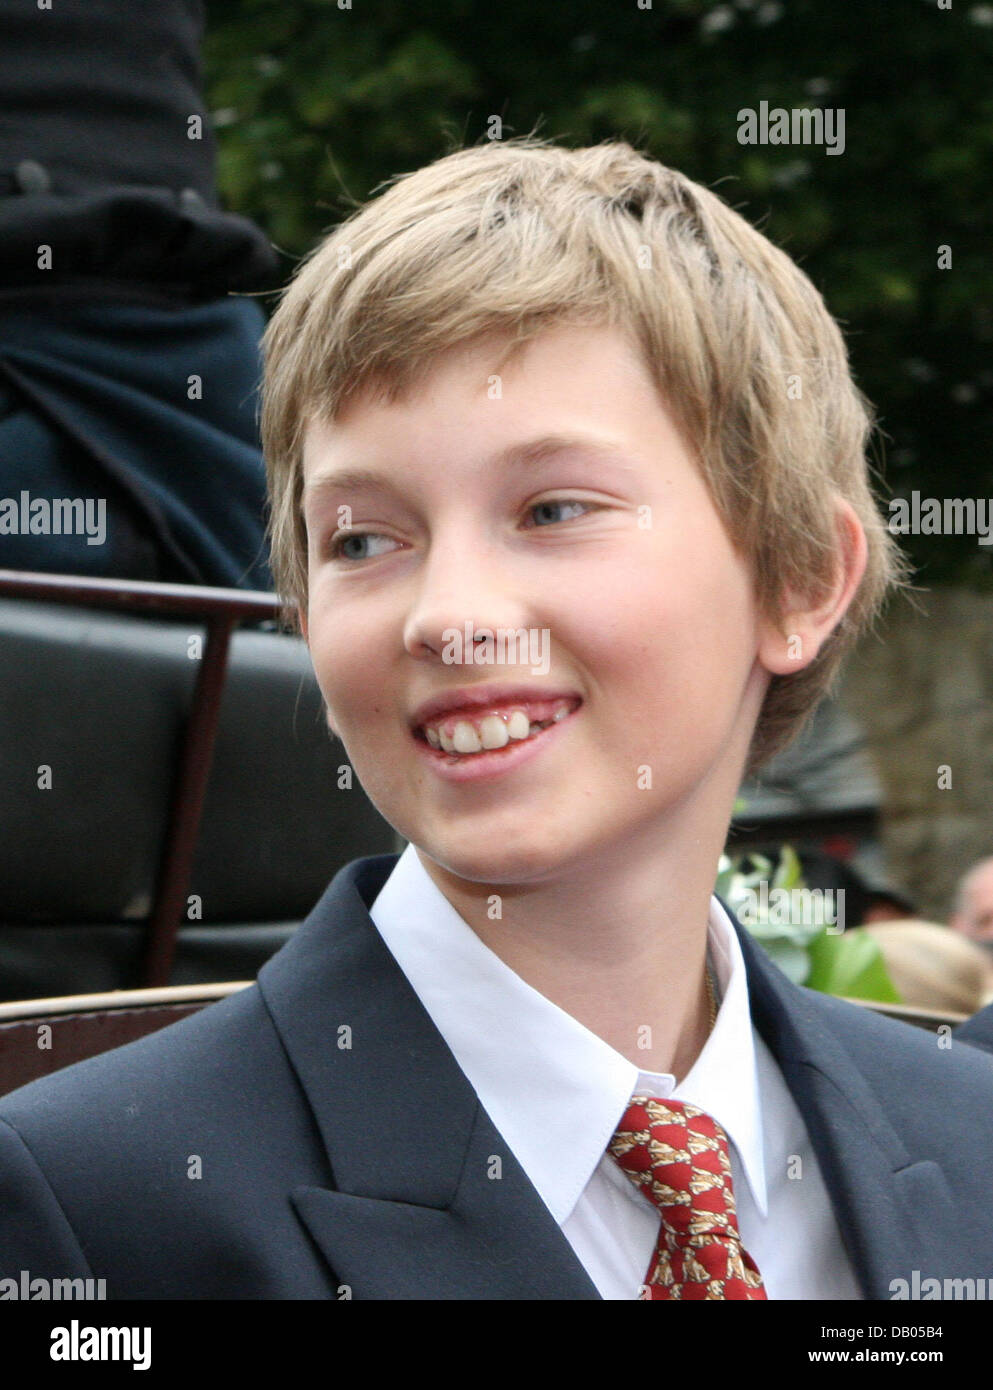 Hereditary prince Heinrich Donatus of Schaumburg-Lippe,  Alexander's son with his first wife Marie Luise of Sayn-Wittgenstein-Berleburg (today Lilly Milona), is pictured smiling before the church wedding of his father in Bueckeburg, Germany, 30 June 2007. Politicians, royals and celebrities were among the 750 invited guests. Photo: Albert Nieboer (NETHERLANDS OUT) Stock Photo